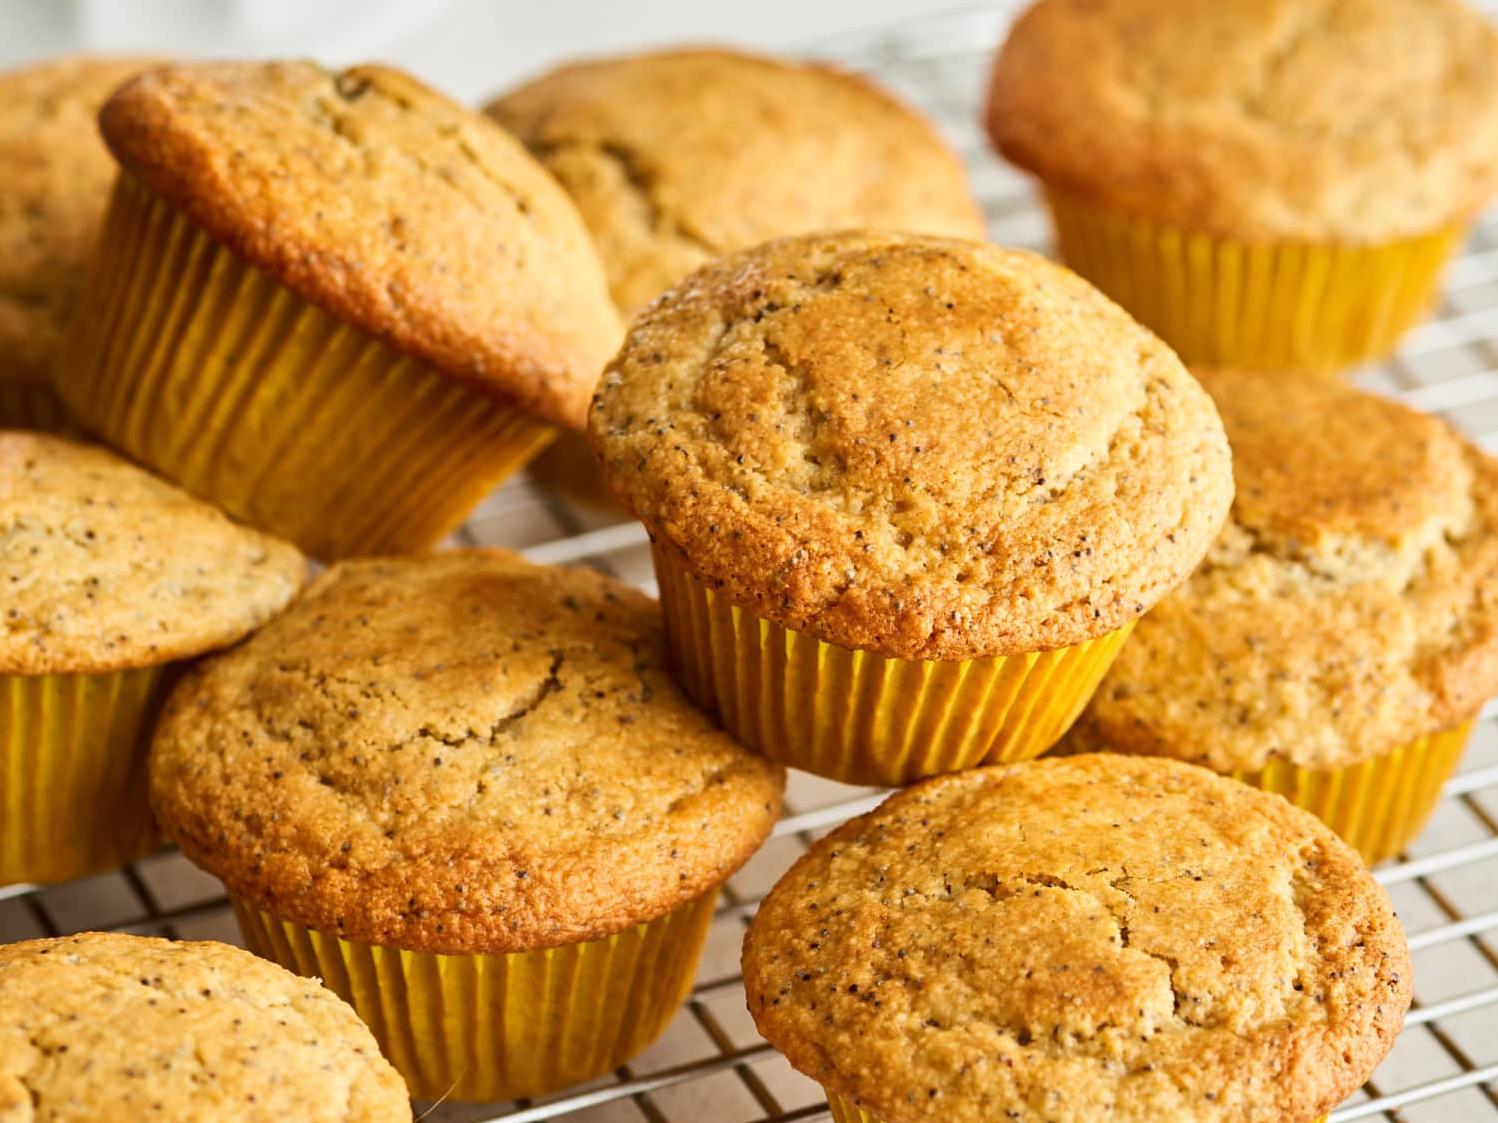  Looking for a gluten-free, dairy-free breakfast option? Try these pork and bean muffins.